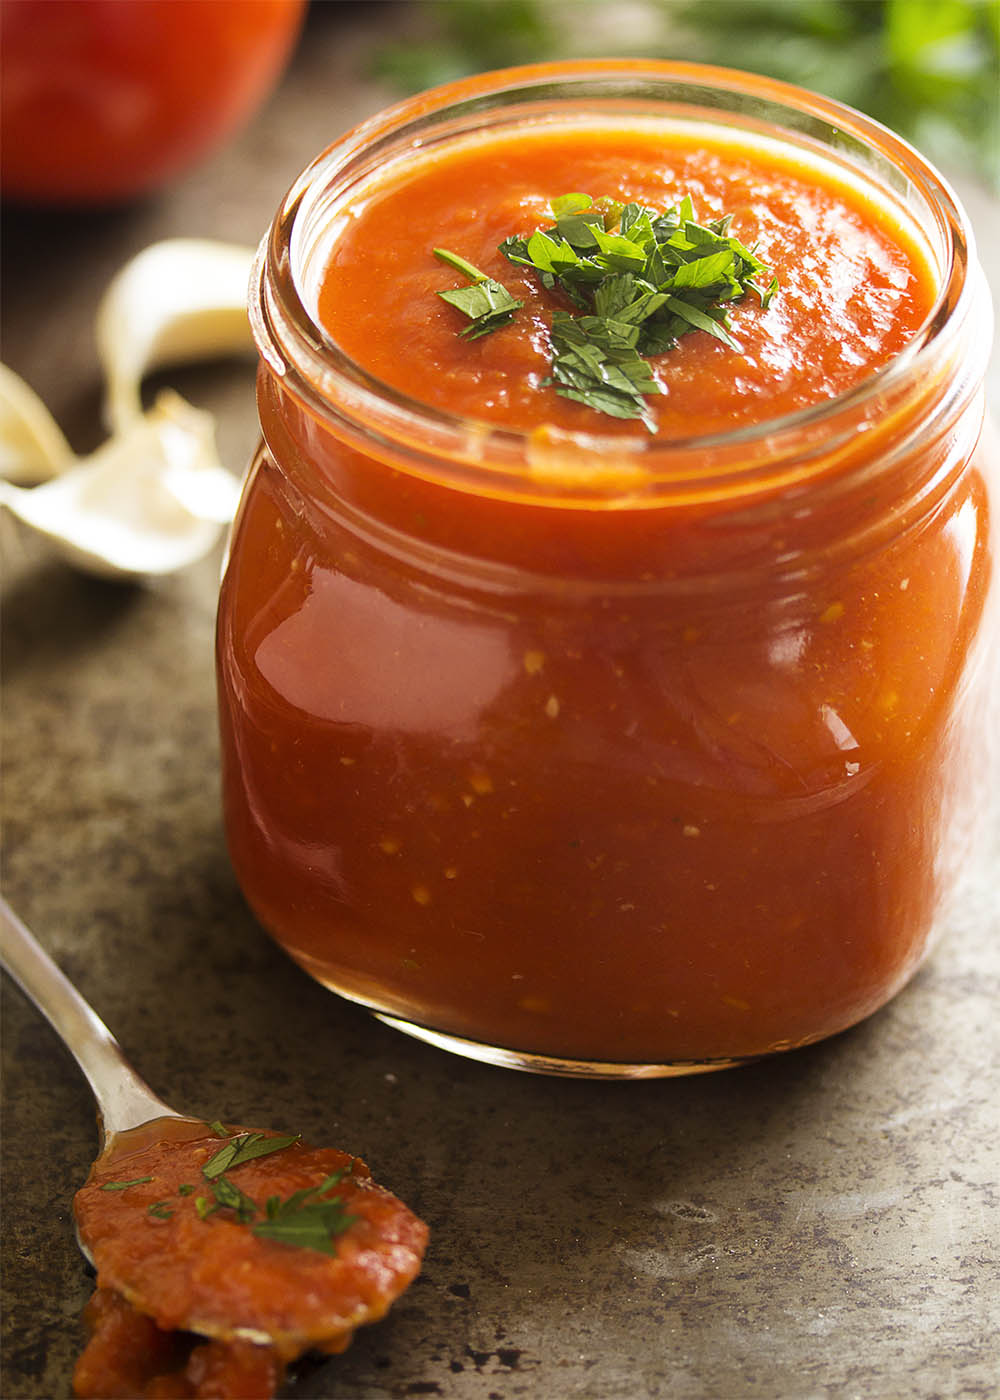 My authentic Italian marinara sauce filling up a glass jar with some fresh, chopped parsley sprinkled on top of the sauce.